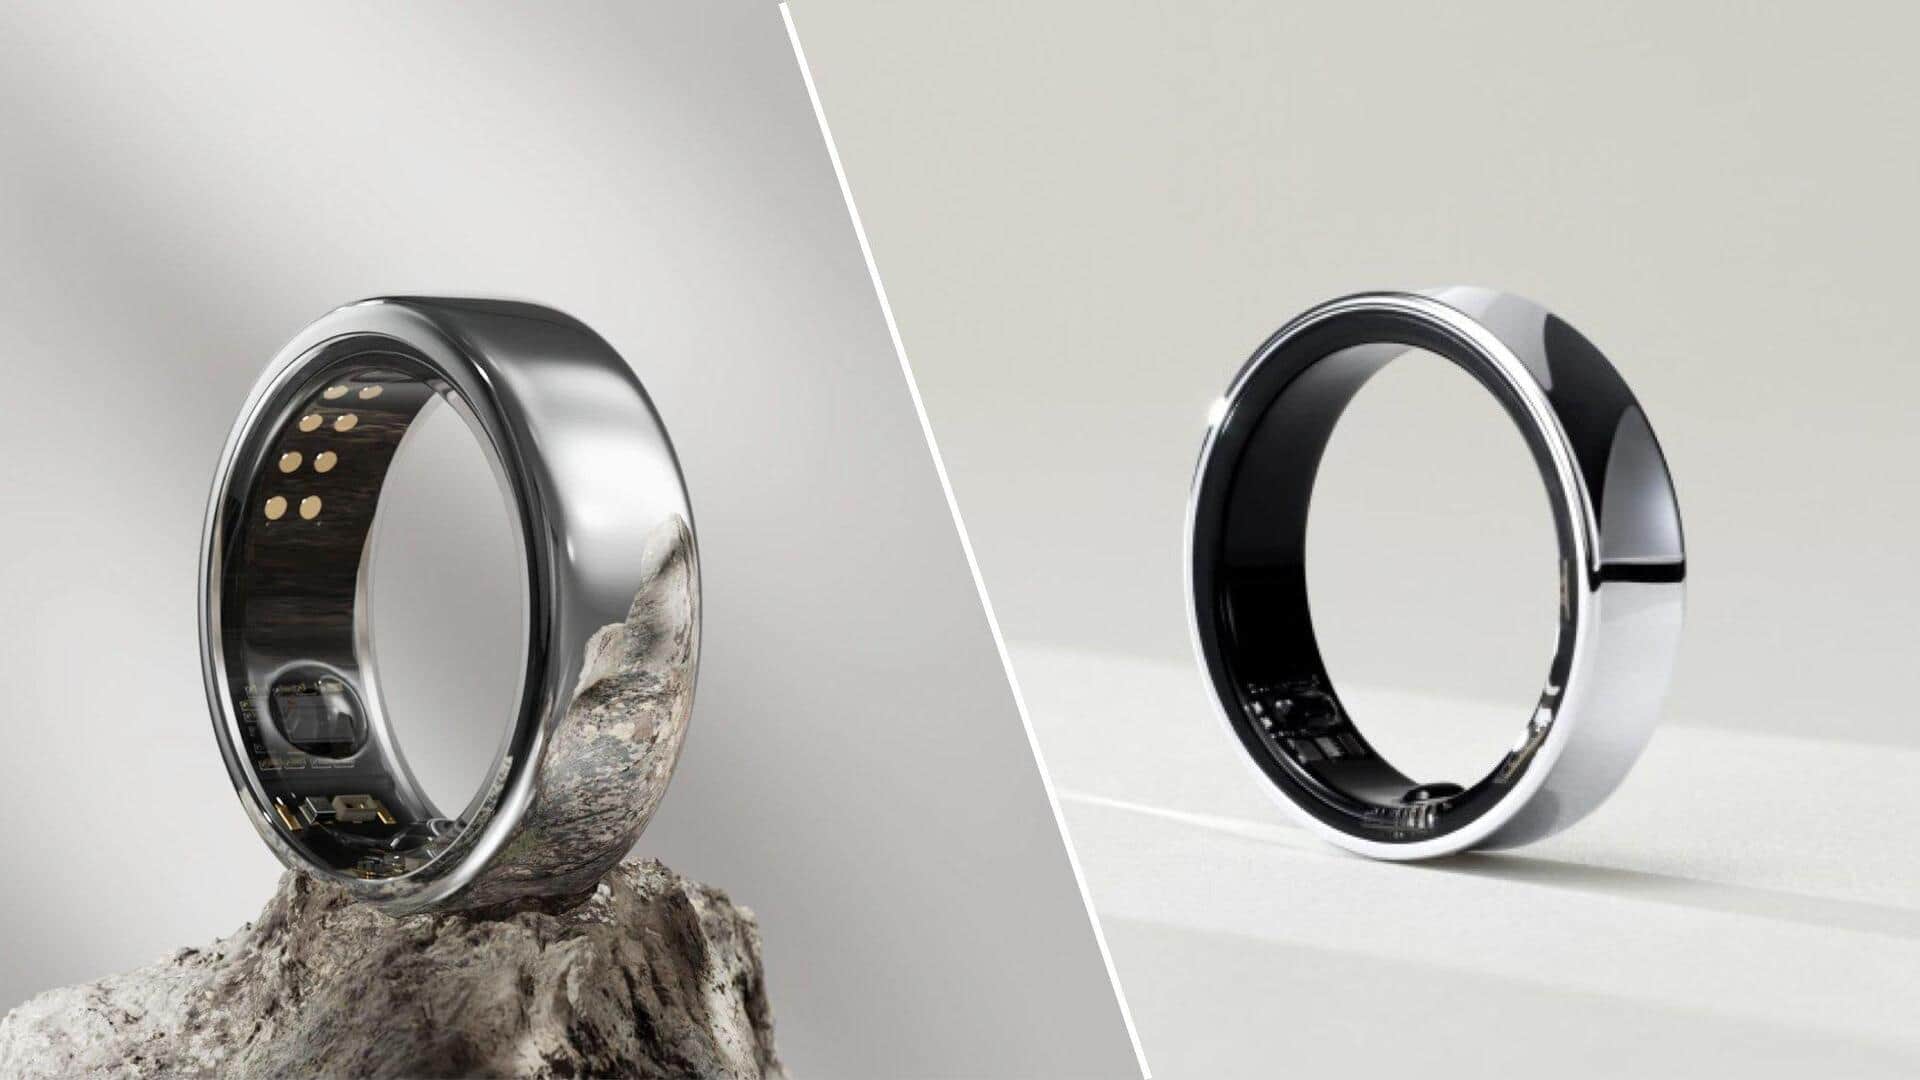 Samsung files lawsuit against Oura ahead of Galaxy Ring launch